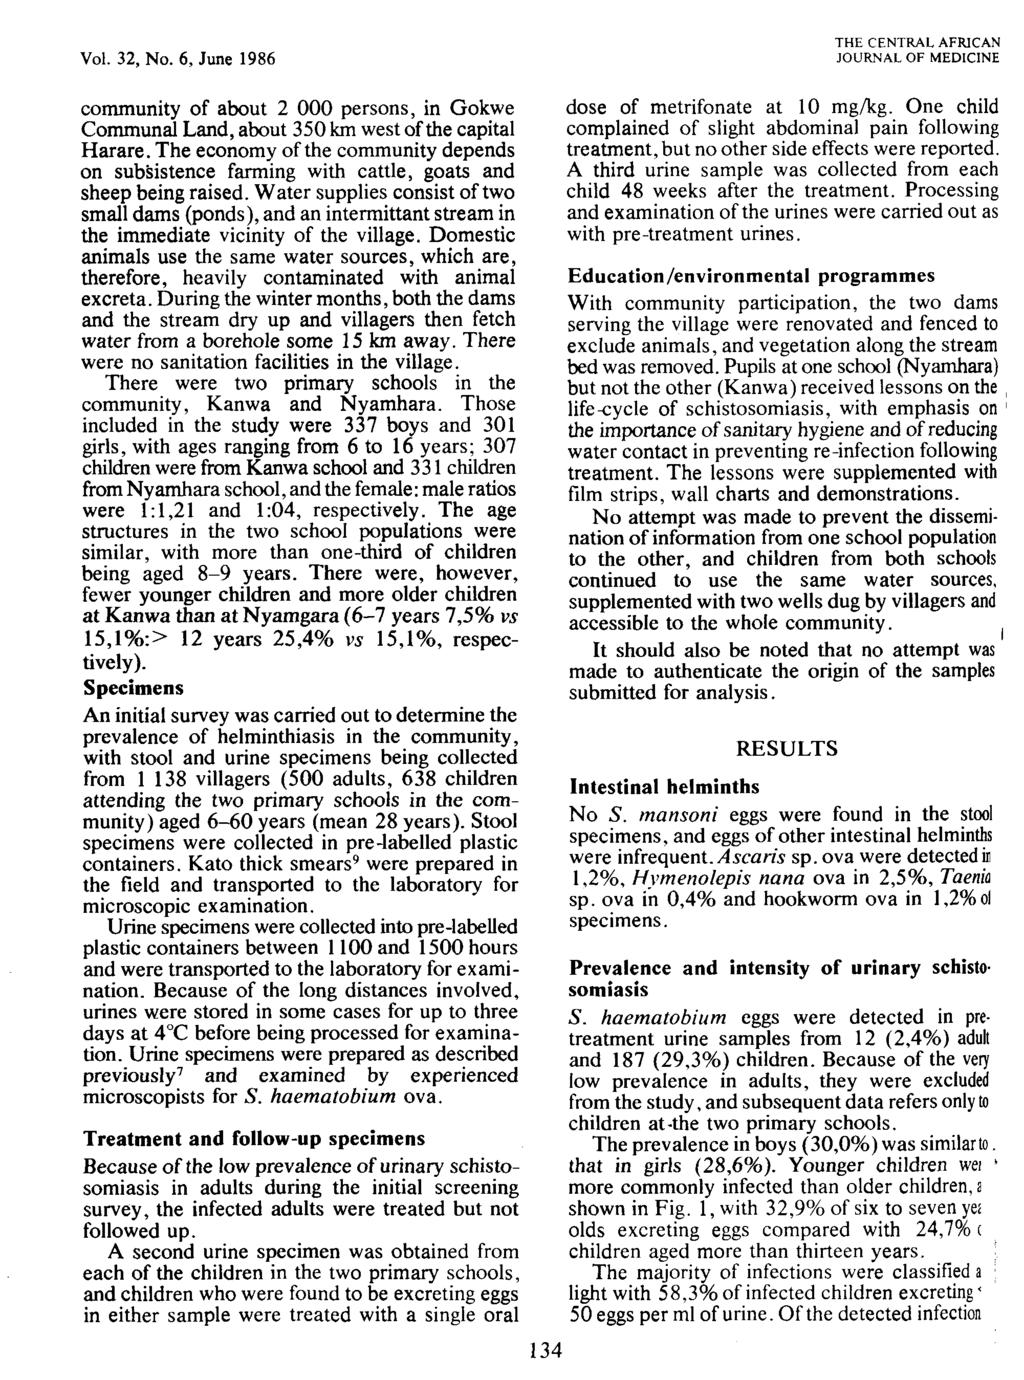 Vol. 32, No. 6, June 1986 THE CENTRAL AFRICAN JOURNAL OF MEDICINE community of about 2 000 persons, in Gokwe Communal Land, about 350 km west of the capital Harare.